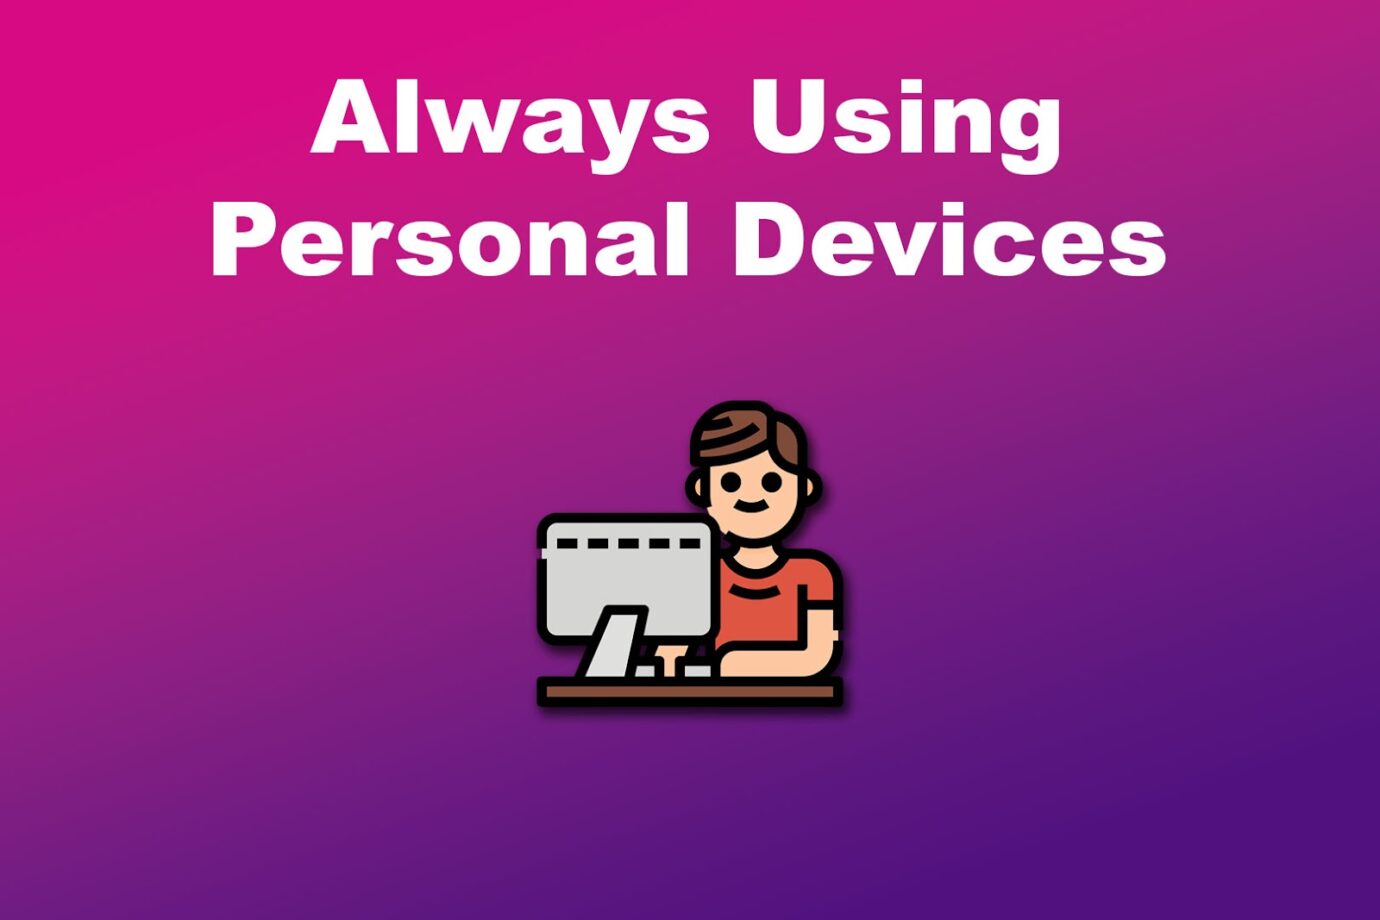 Two Remote Jobs Using Personal Devices